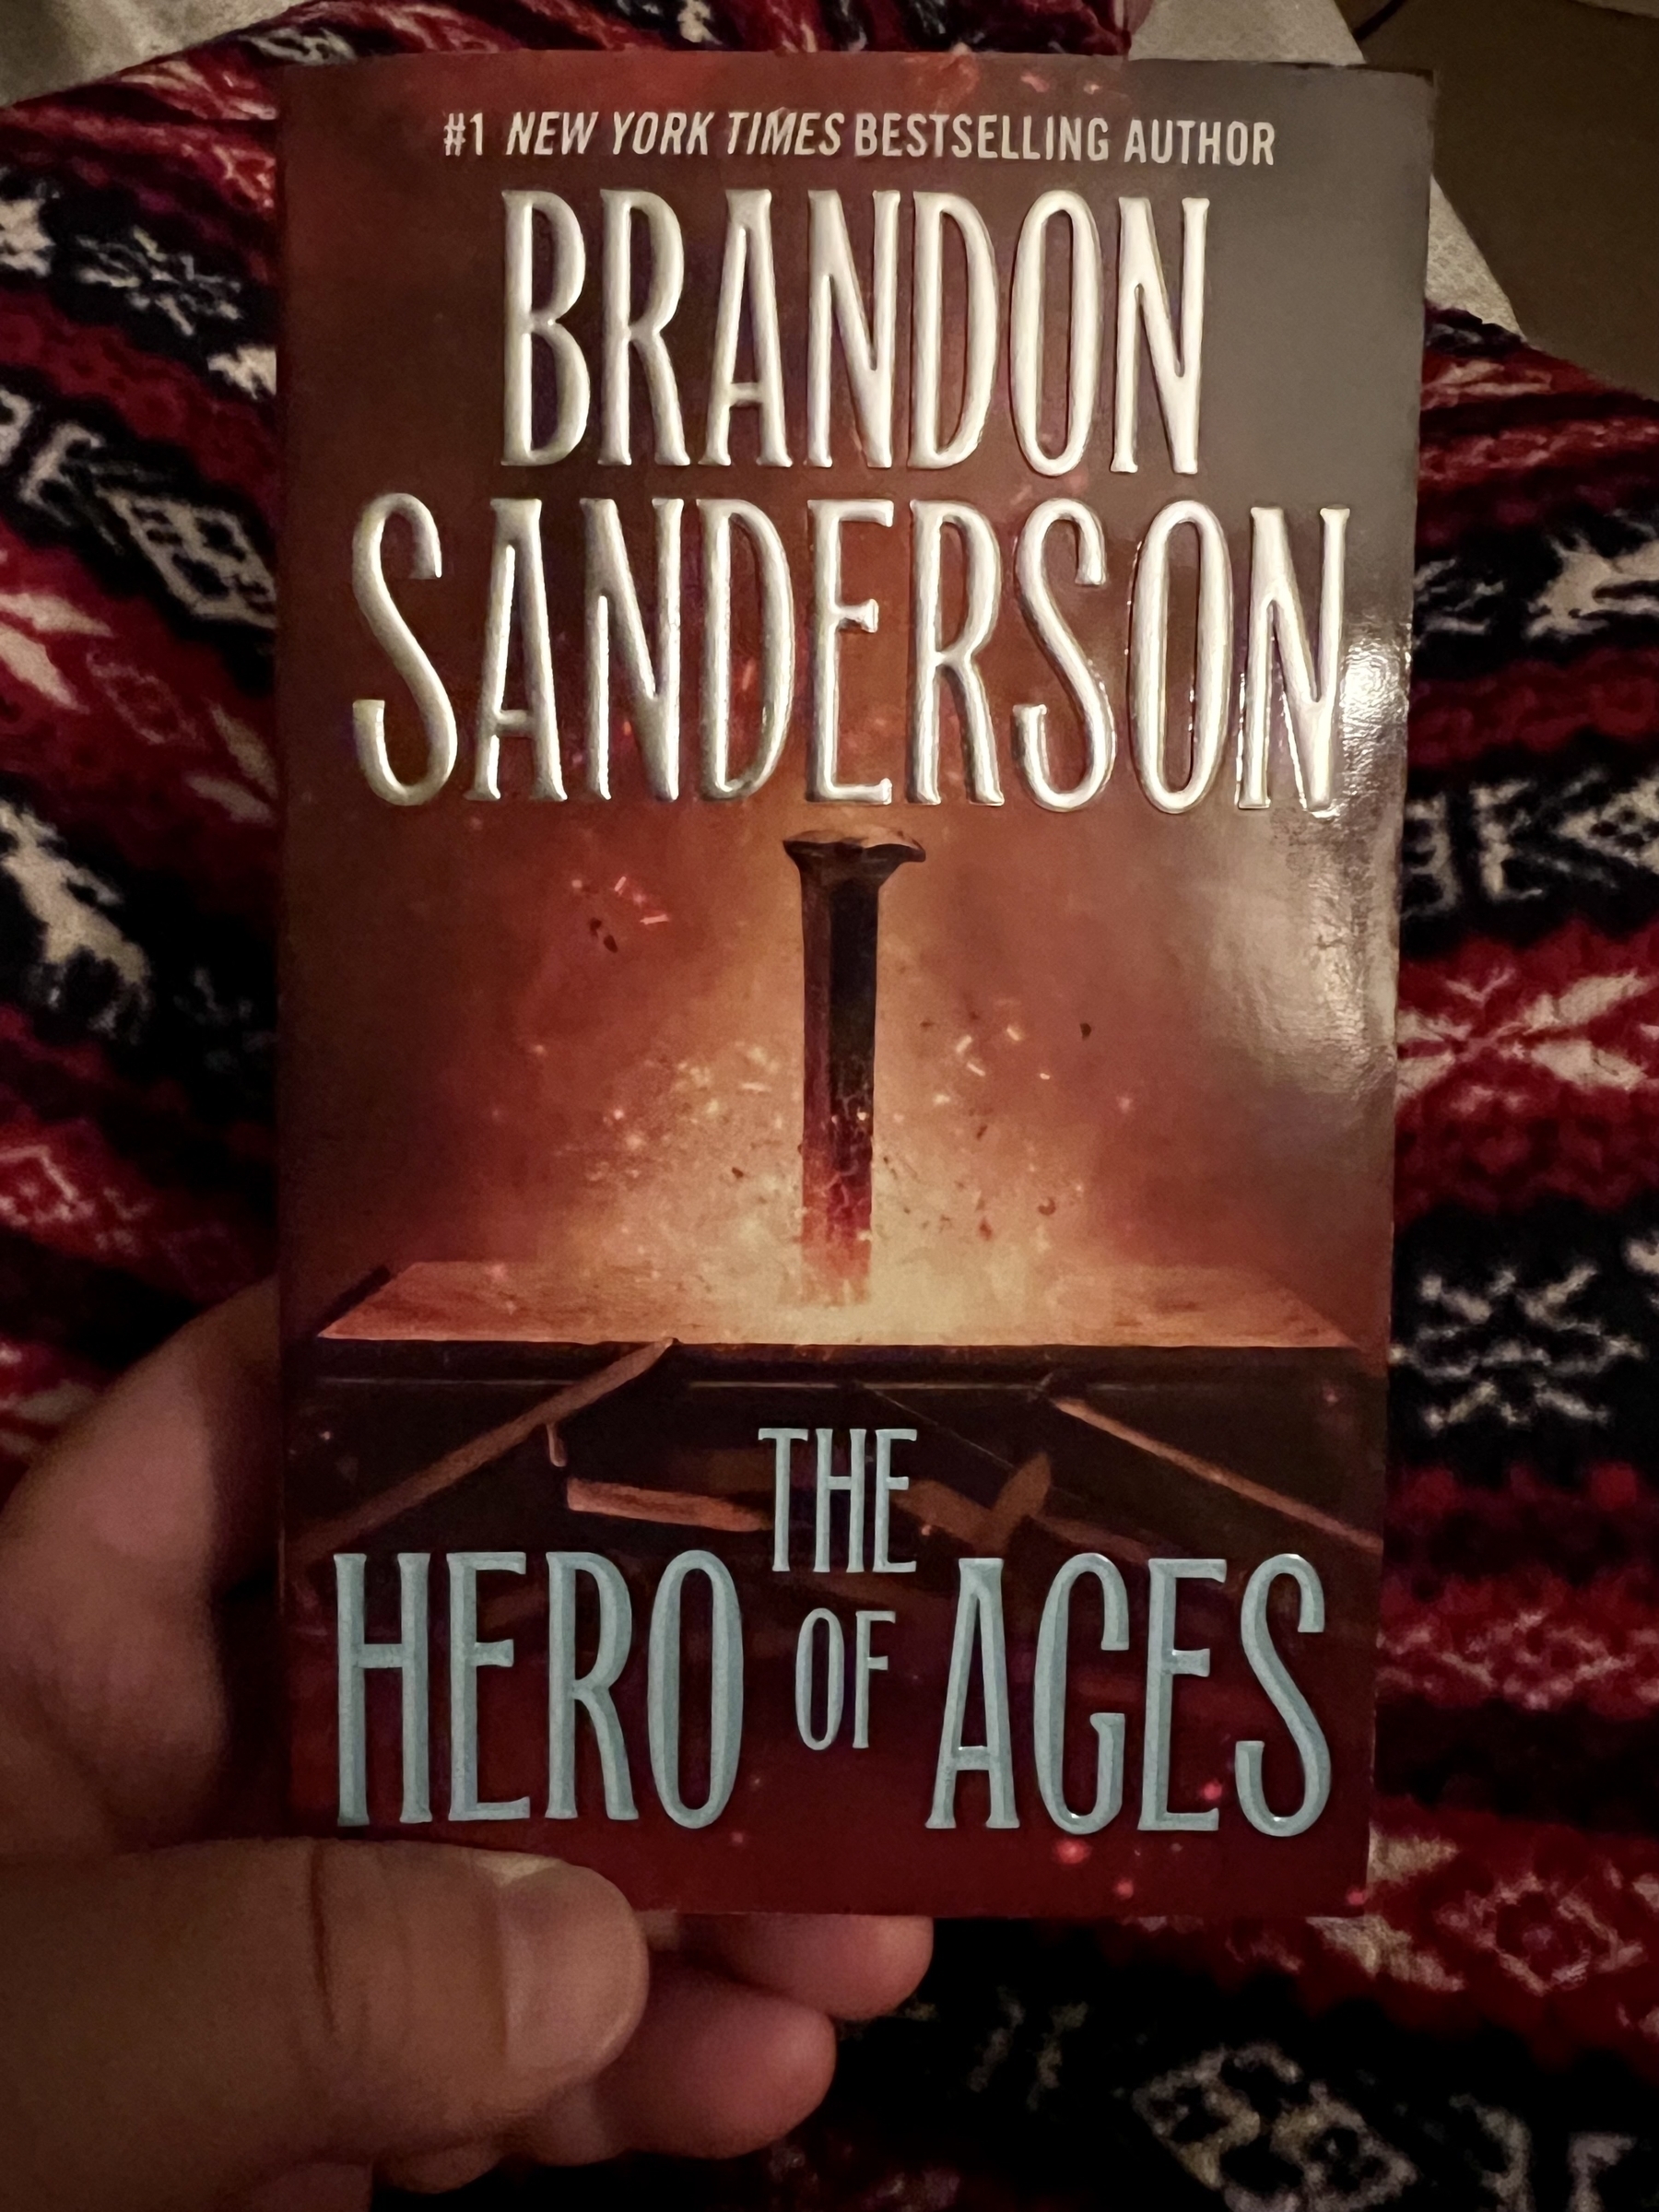 The Hero of Ages by Brandon Sanderson book is pictured in my hand. 